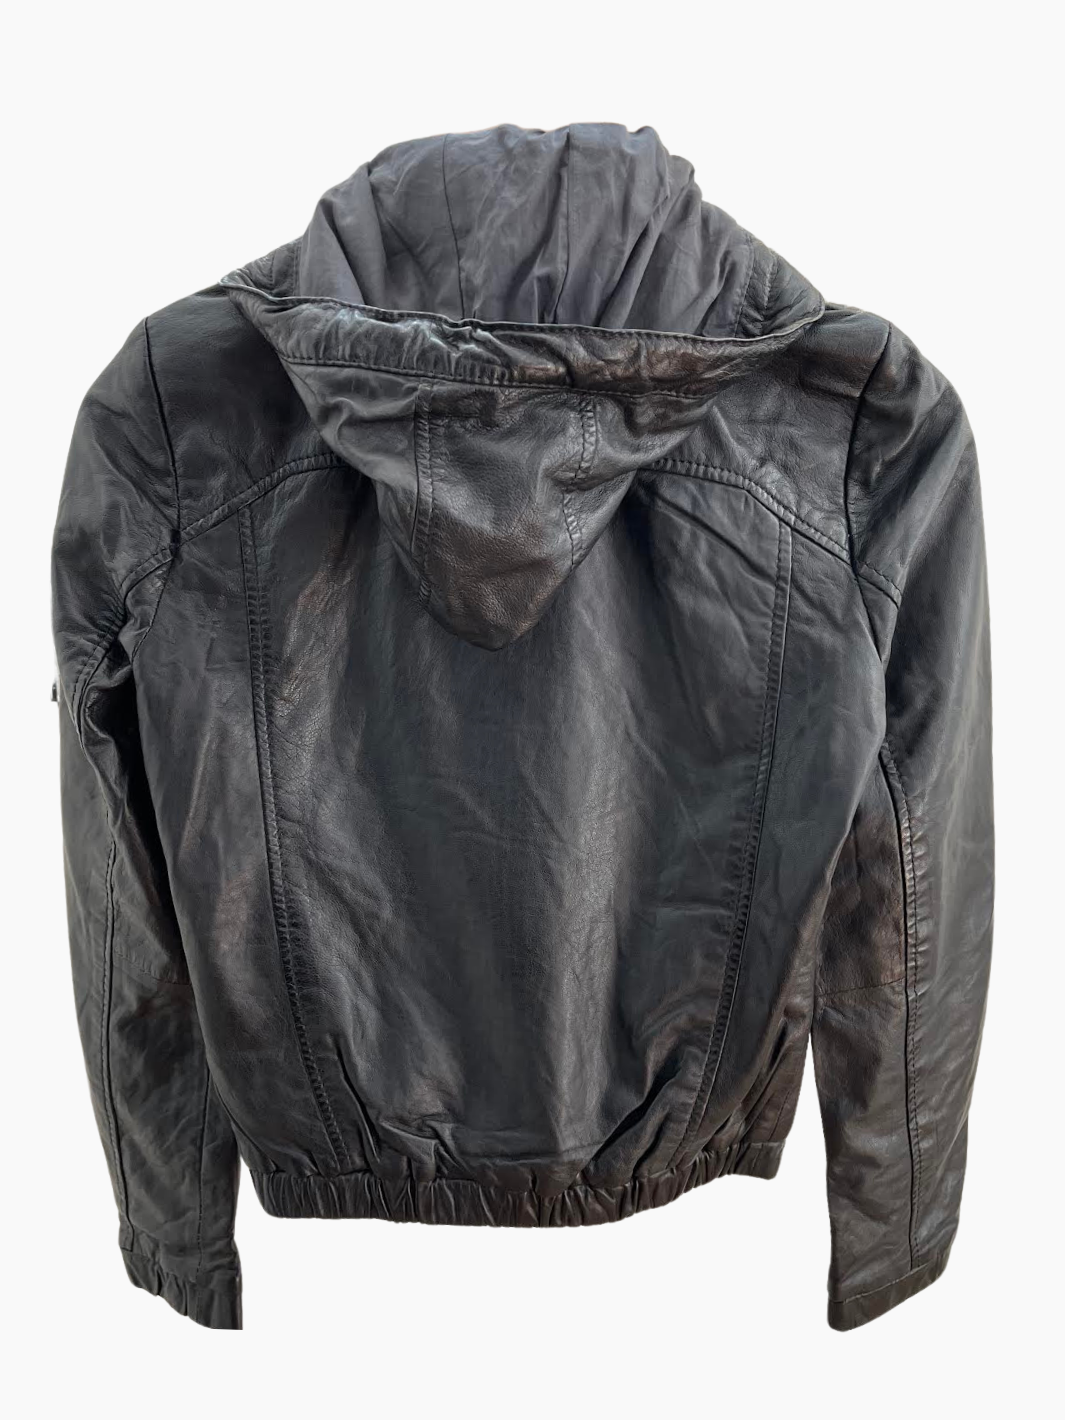 MAEV RF LEATHER JACKET IN BLACK - Romi Boutique